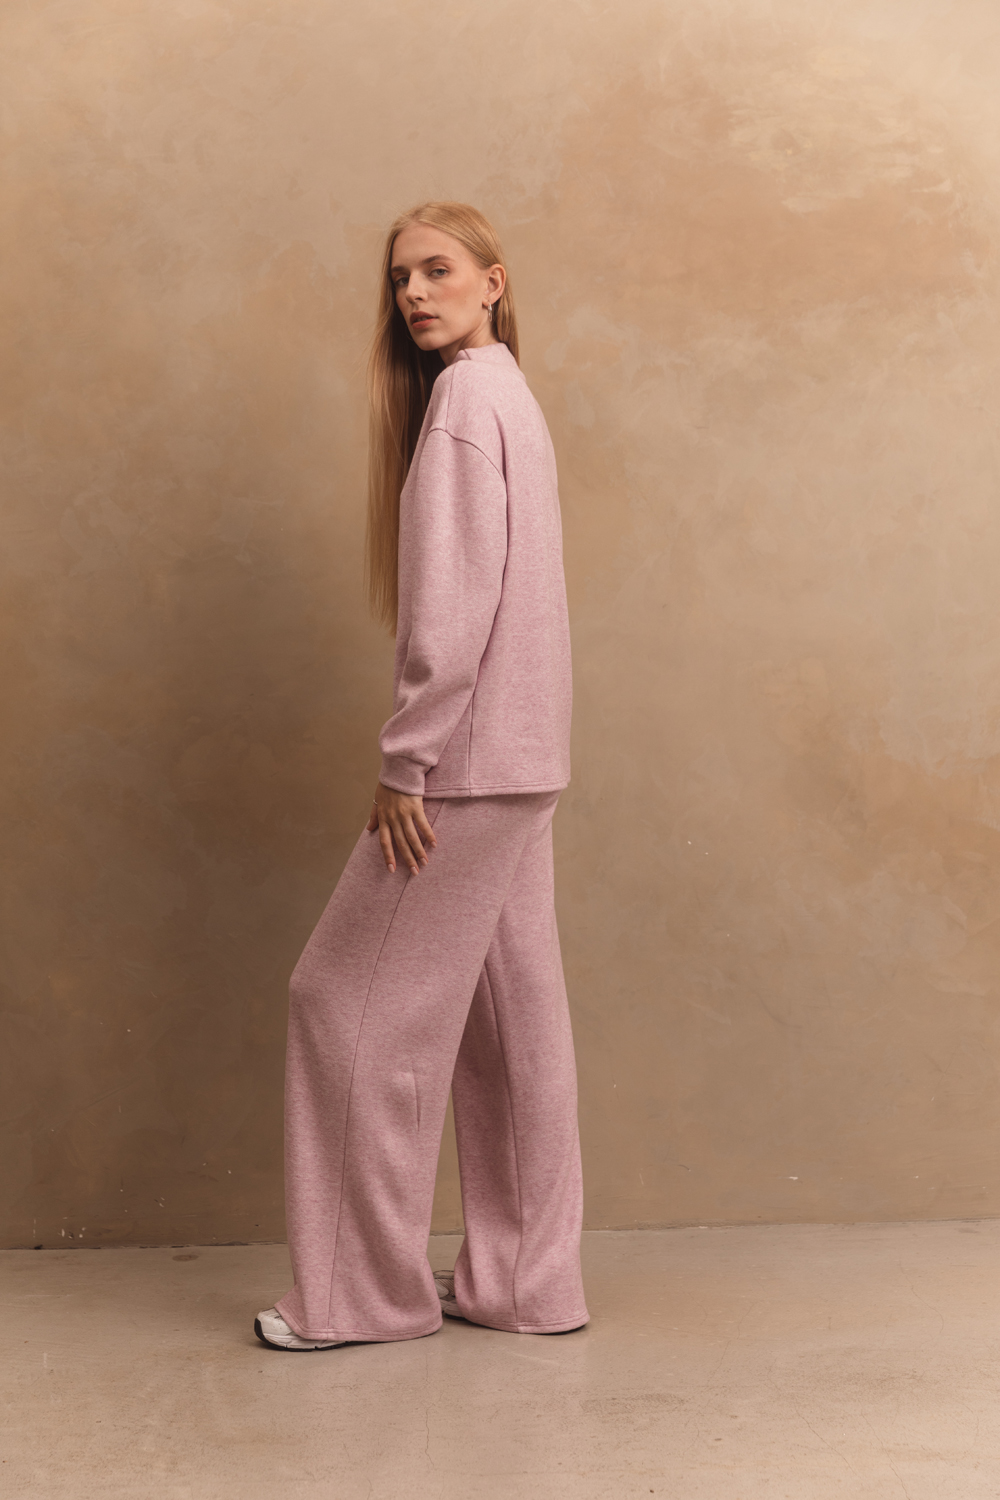 Angora pantsuit in color 